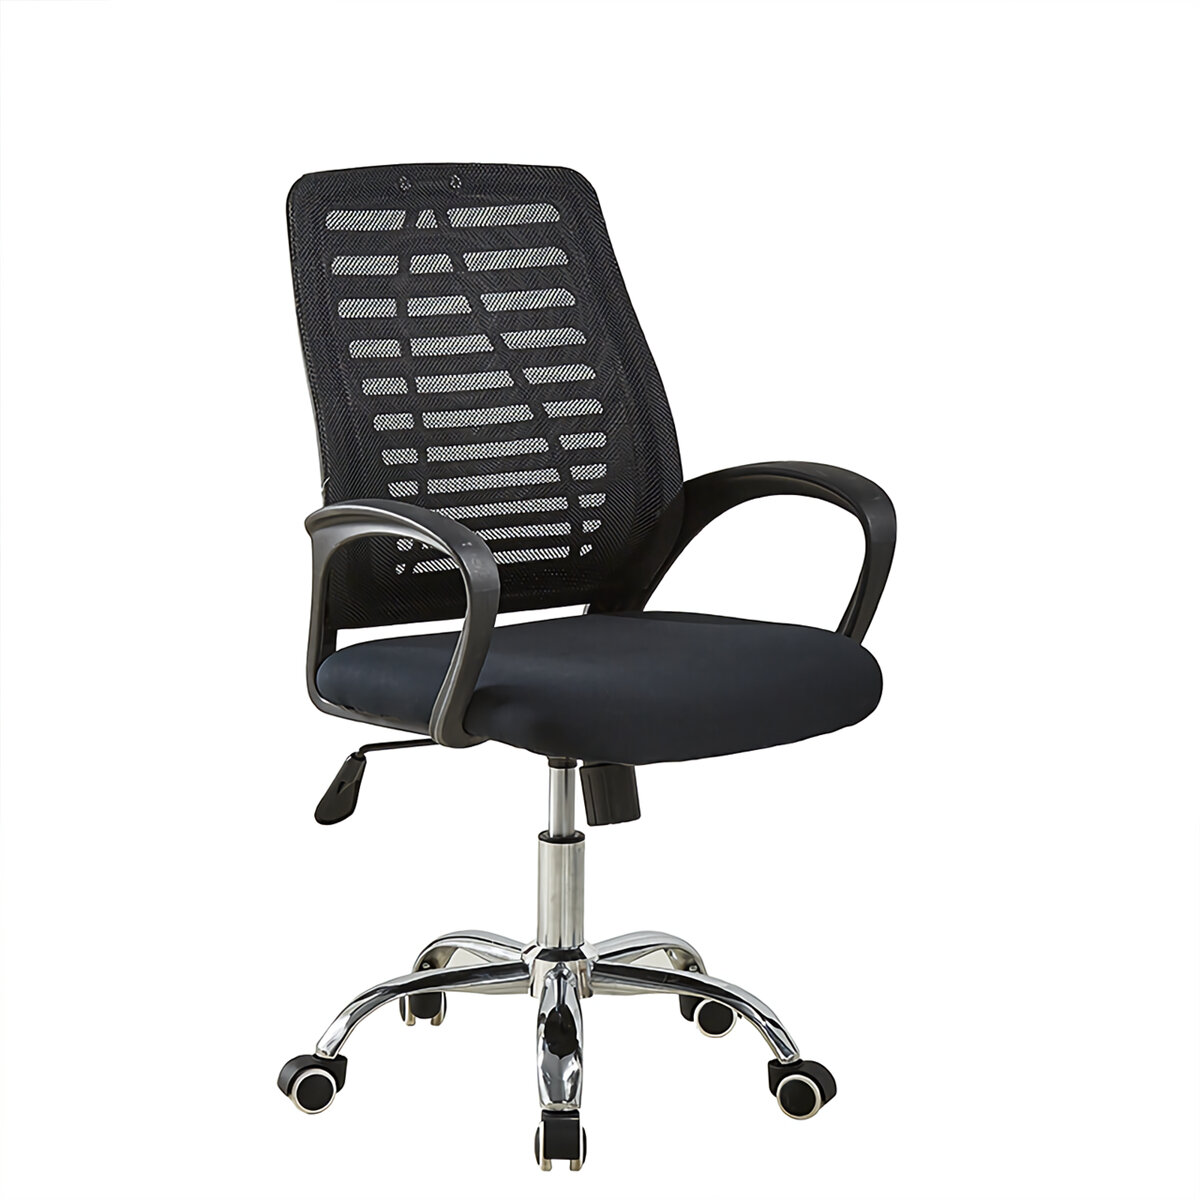 

Office Mesh Chair Executive Ergonomic Rotating Mid-back Computer Desk Seat Adjustable Lifting Chair Home Office Furnitur